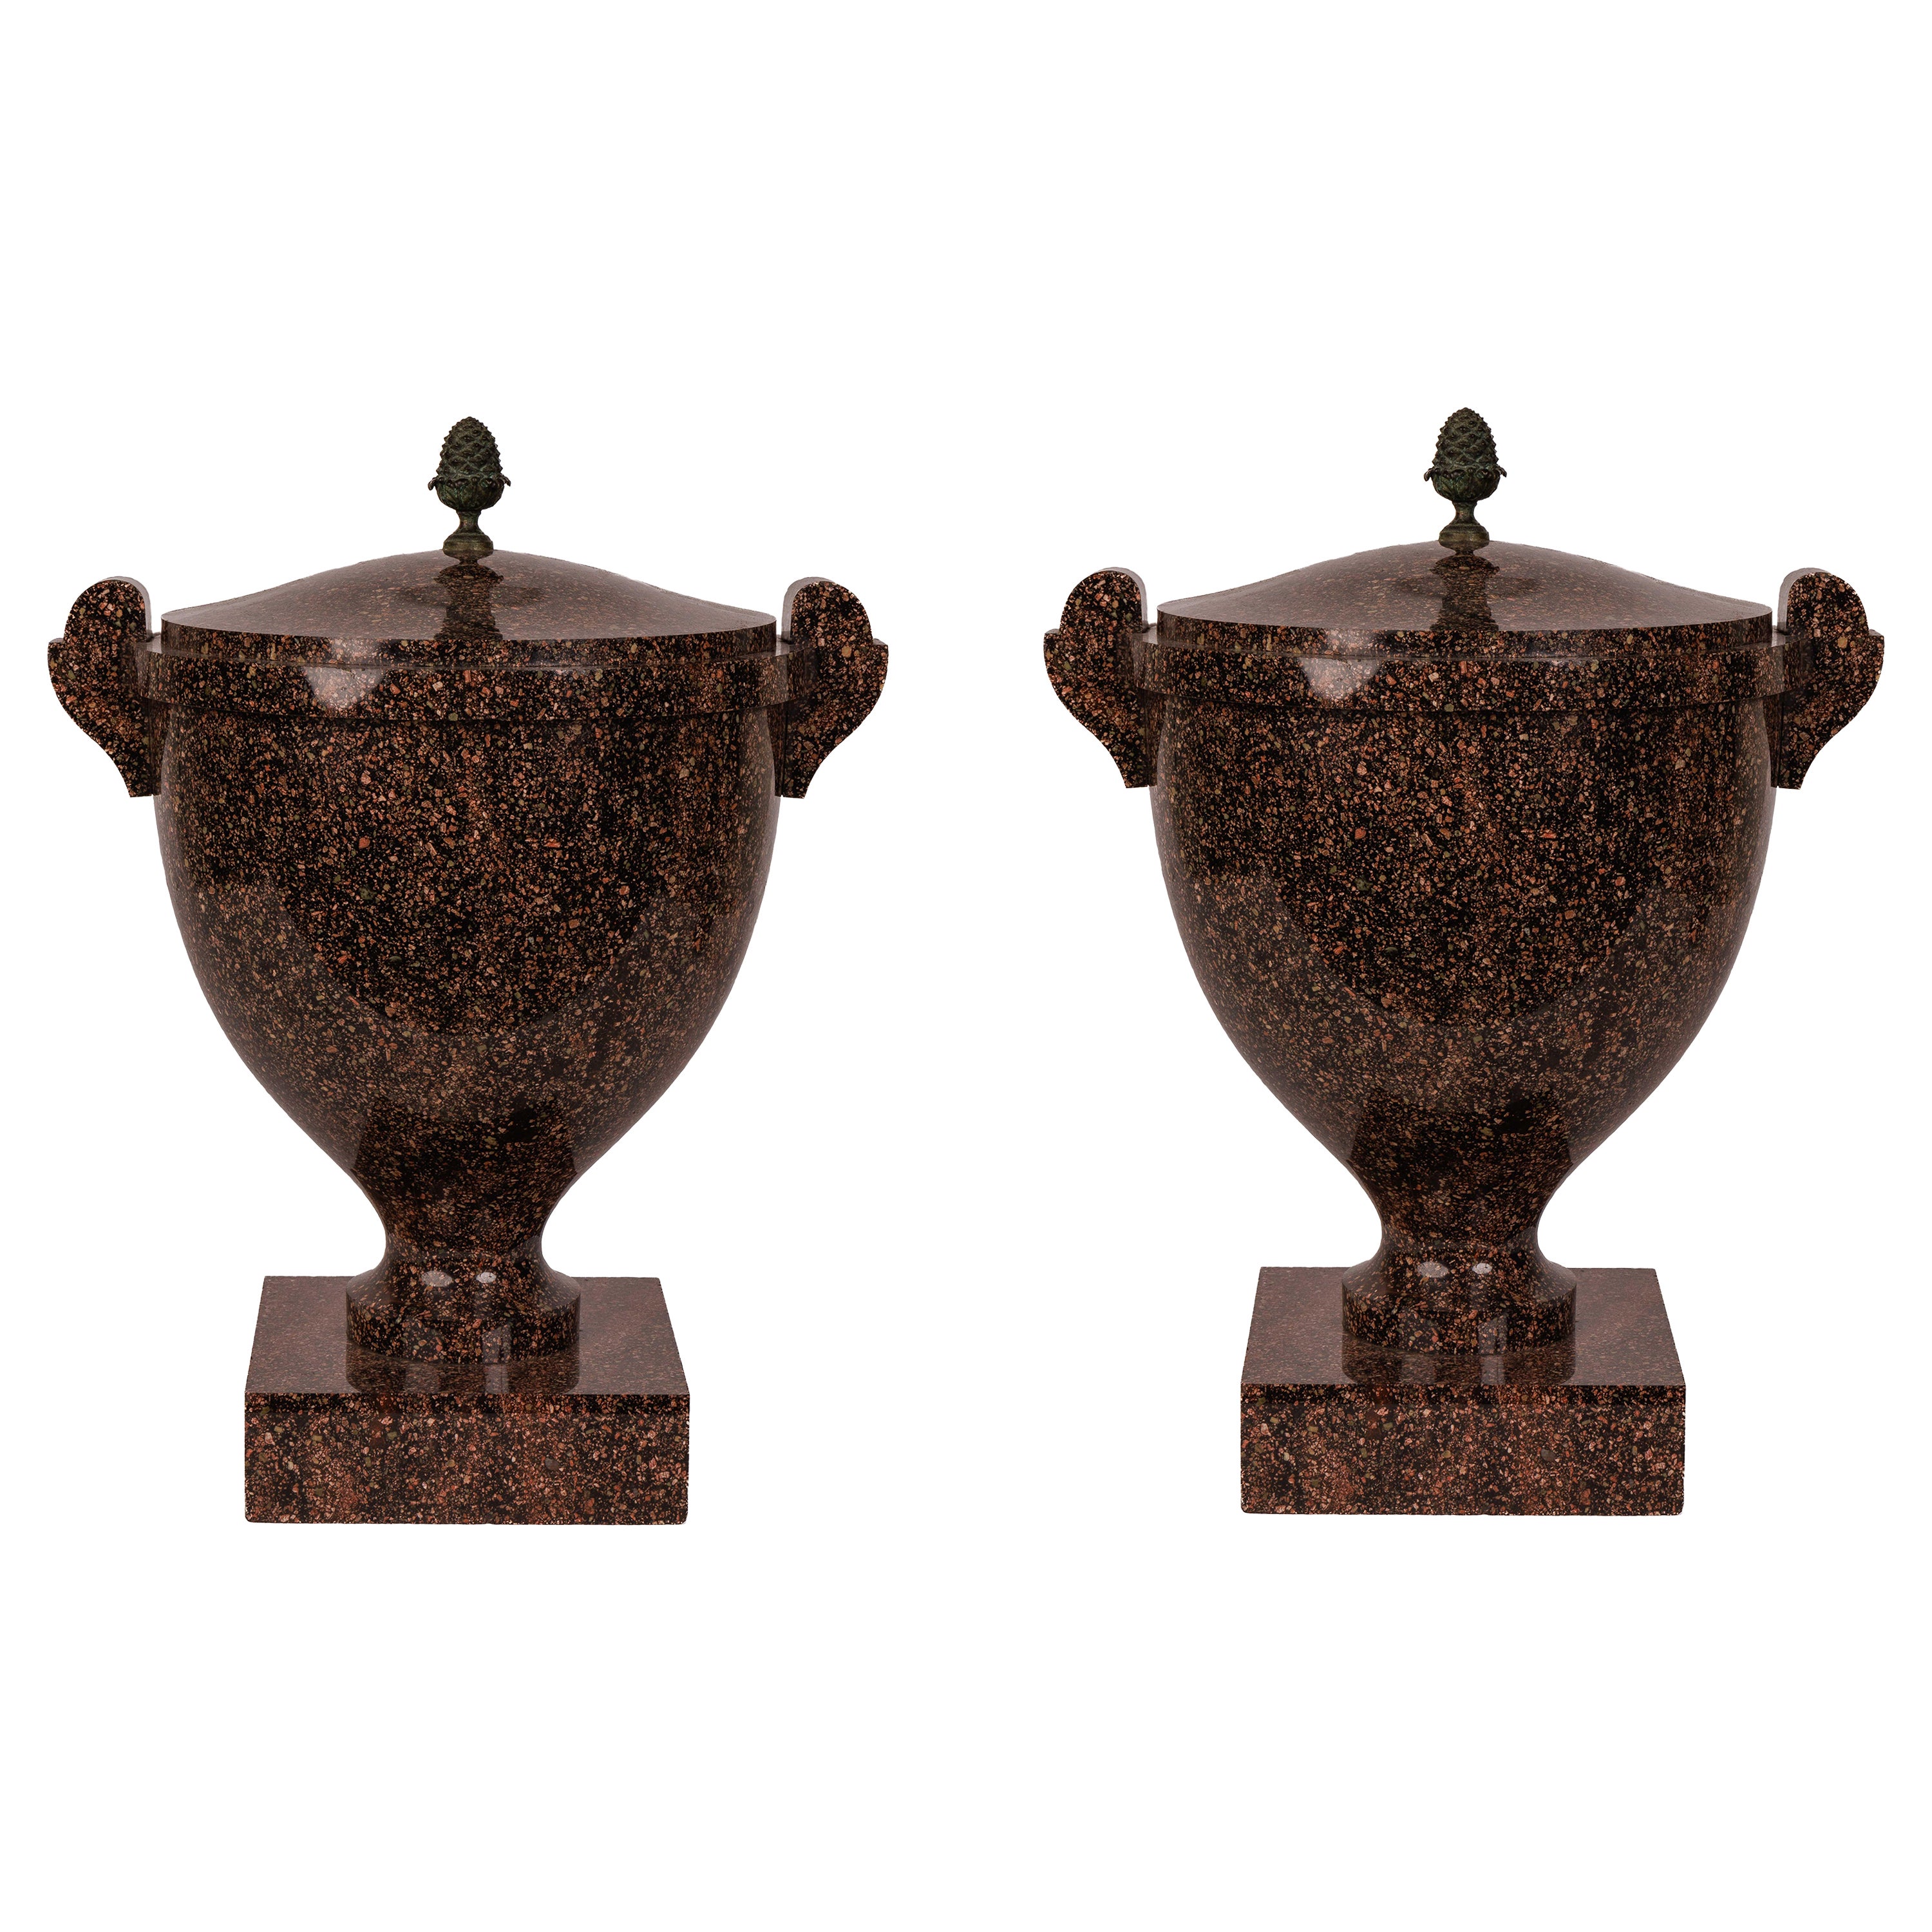 Large Pair of Swedish Blyberg Porphyry Vases and Covers, Early 19th Century For Sale